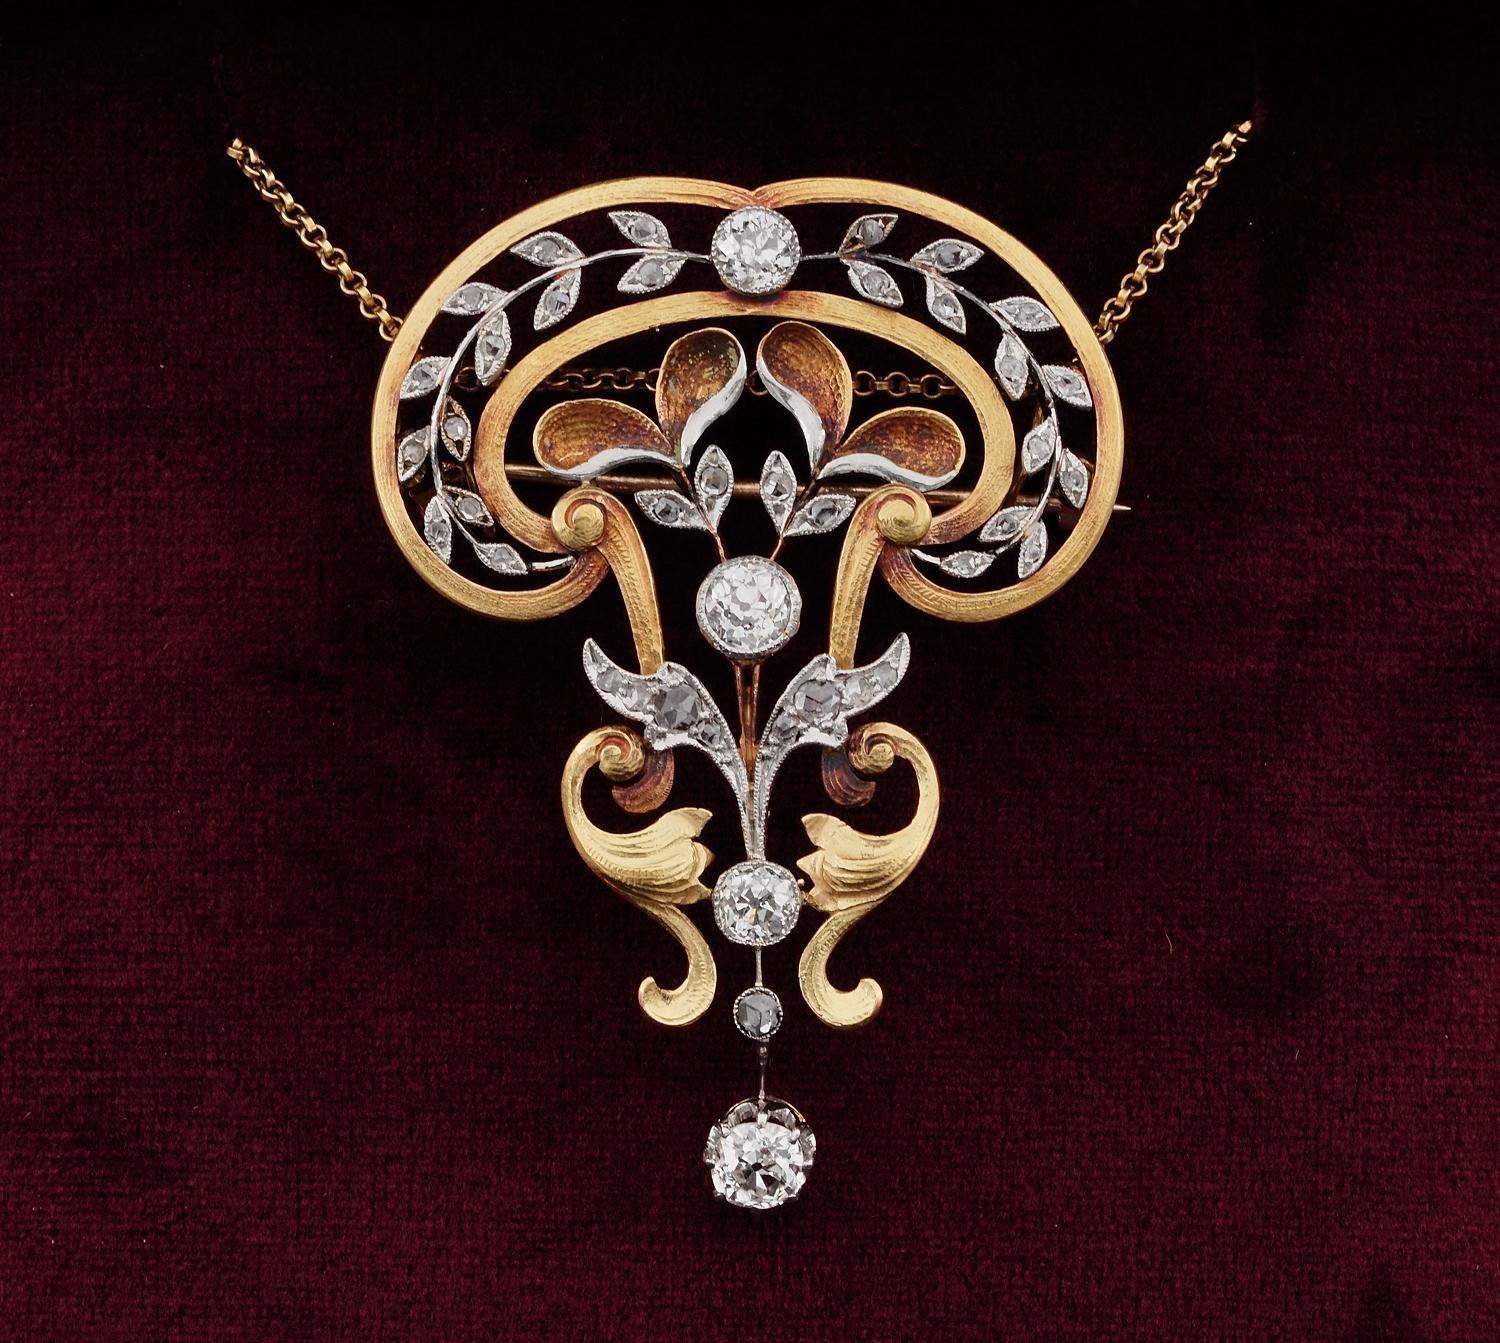 Work of Art

The Art Nouveau style as it developed in France renewed jewelry creation as an art, incongruously, it was to be imitated ruthlessly around the world
Magnificent pieces as much as this are rare survivors of that short time period